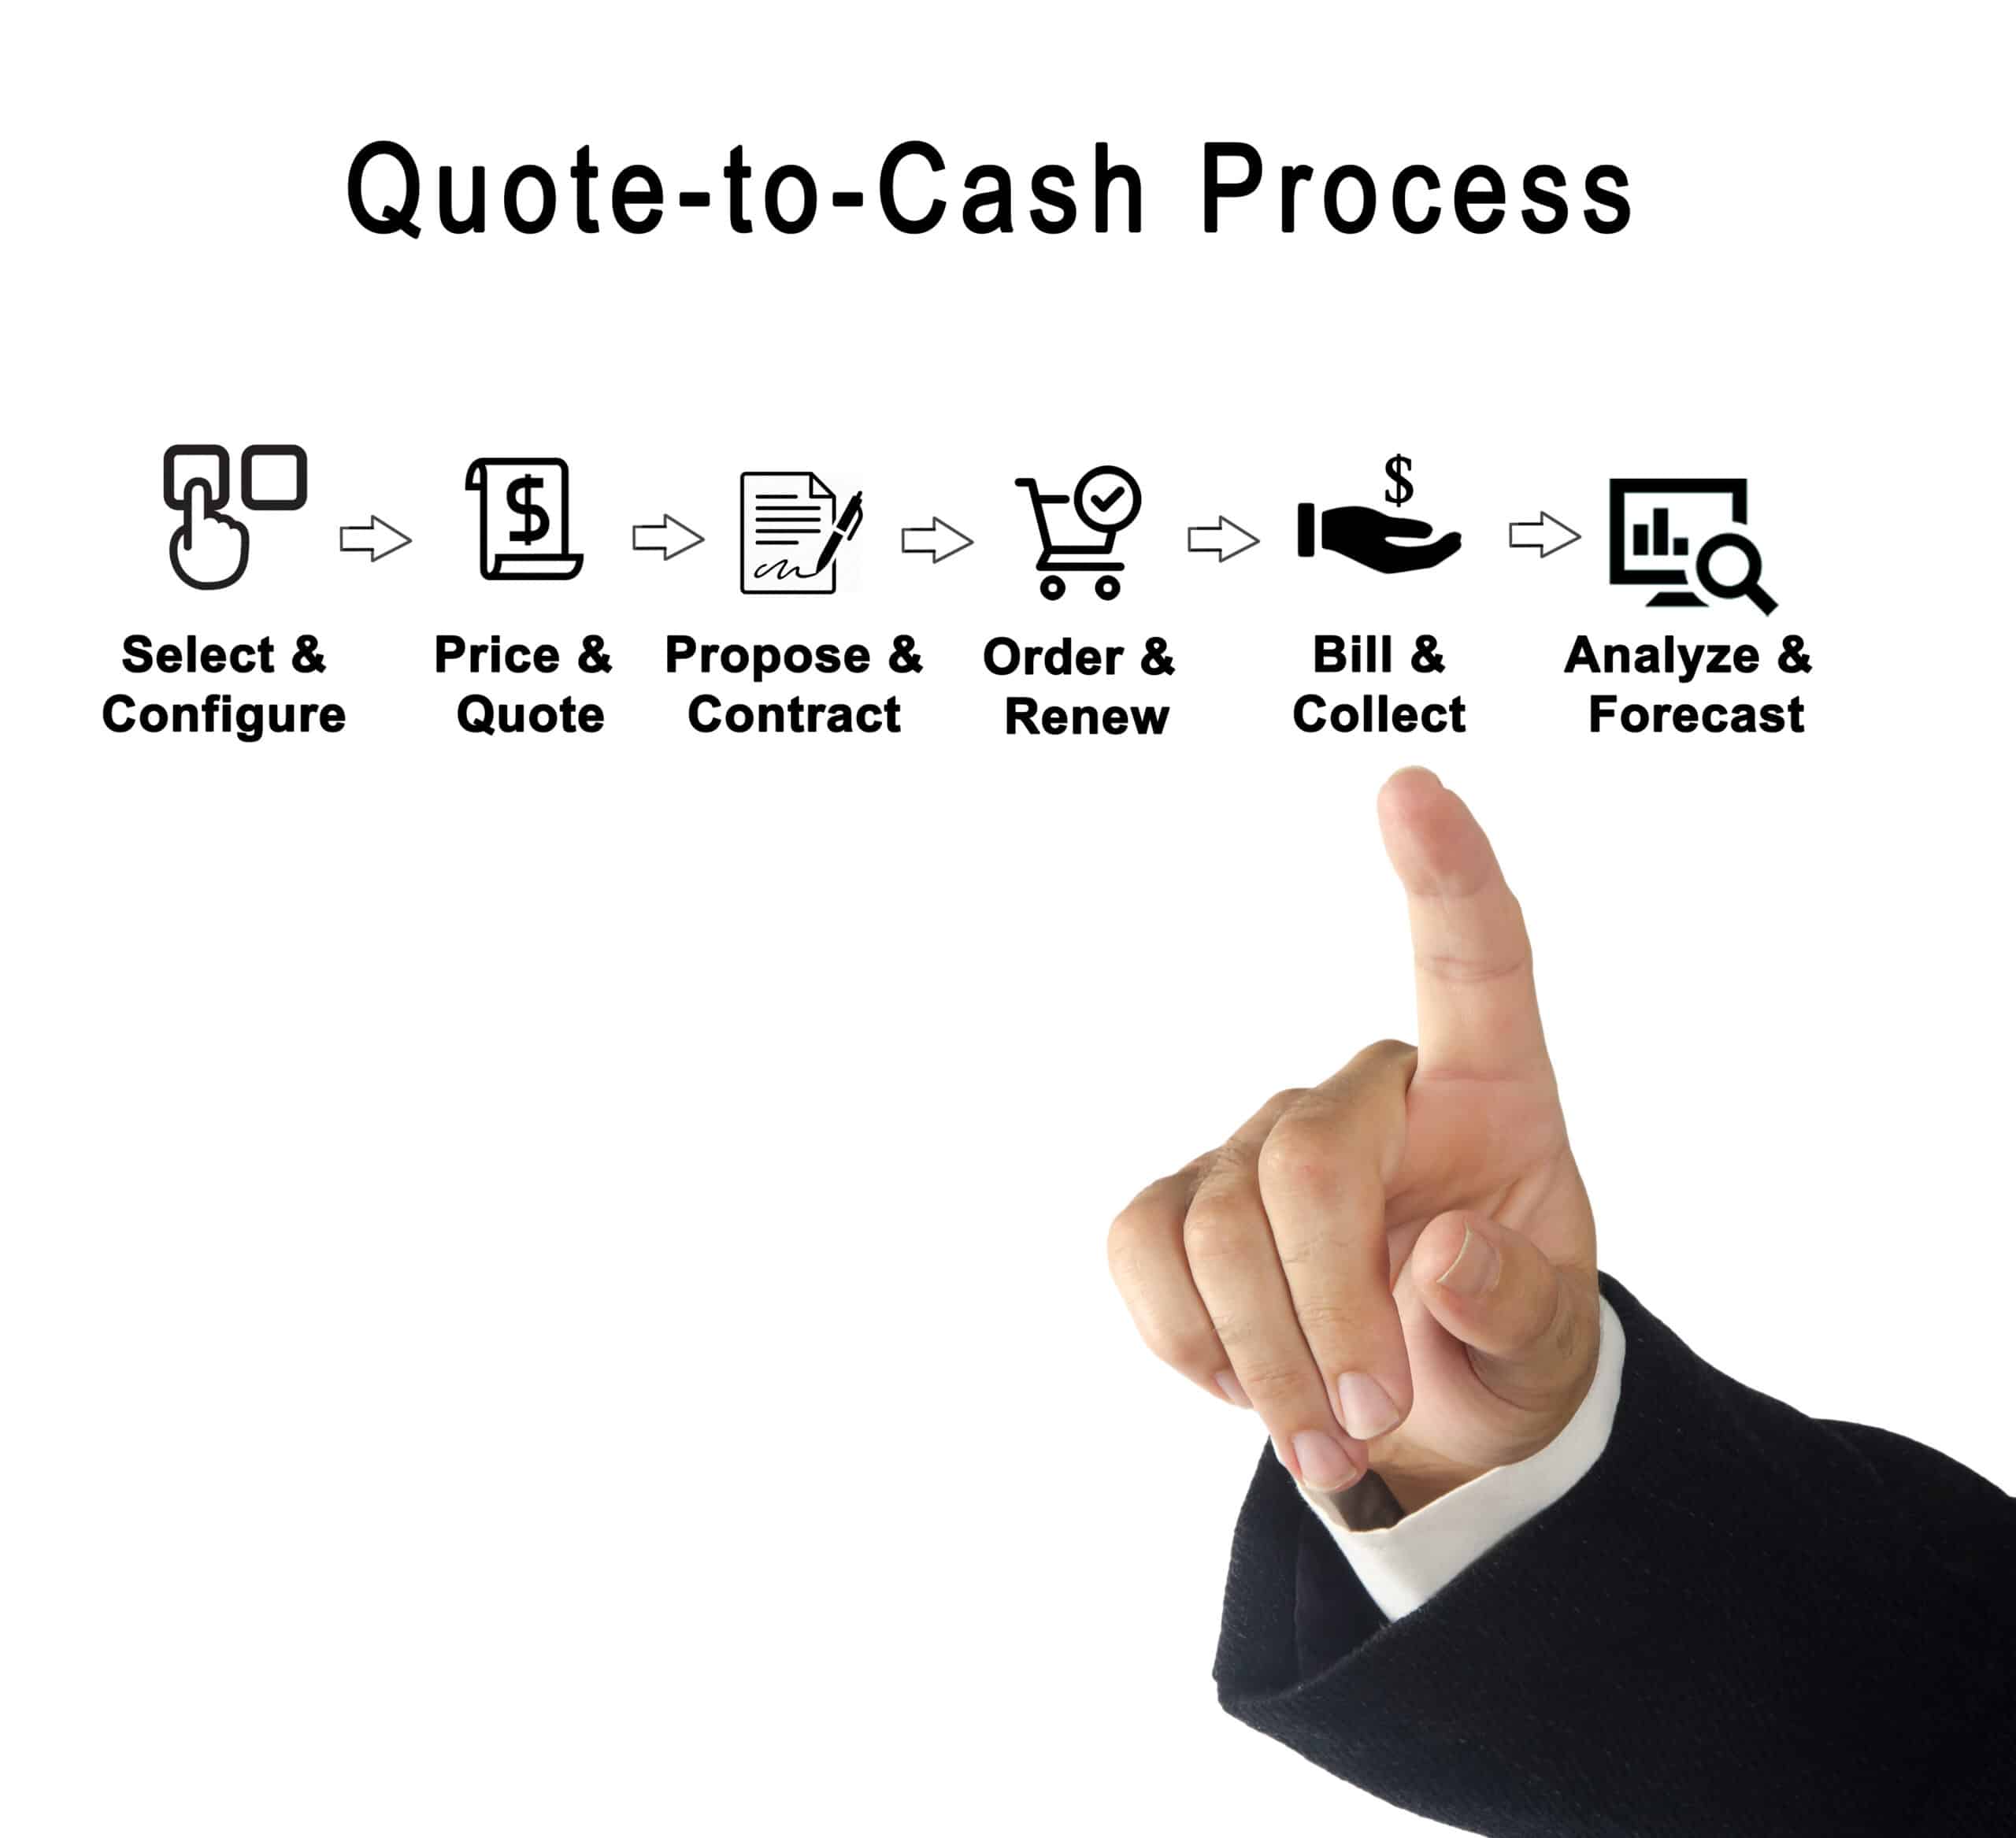 Salesforce quote-to-cash process